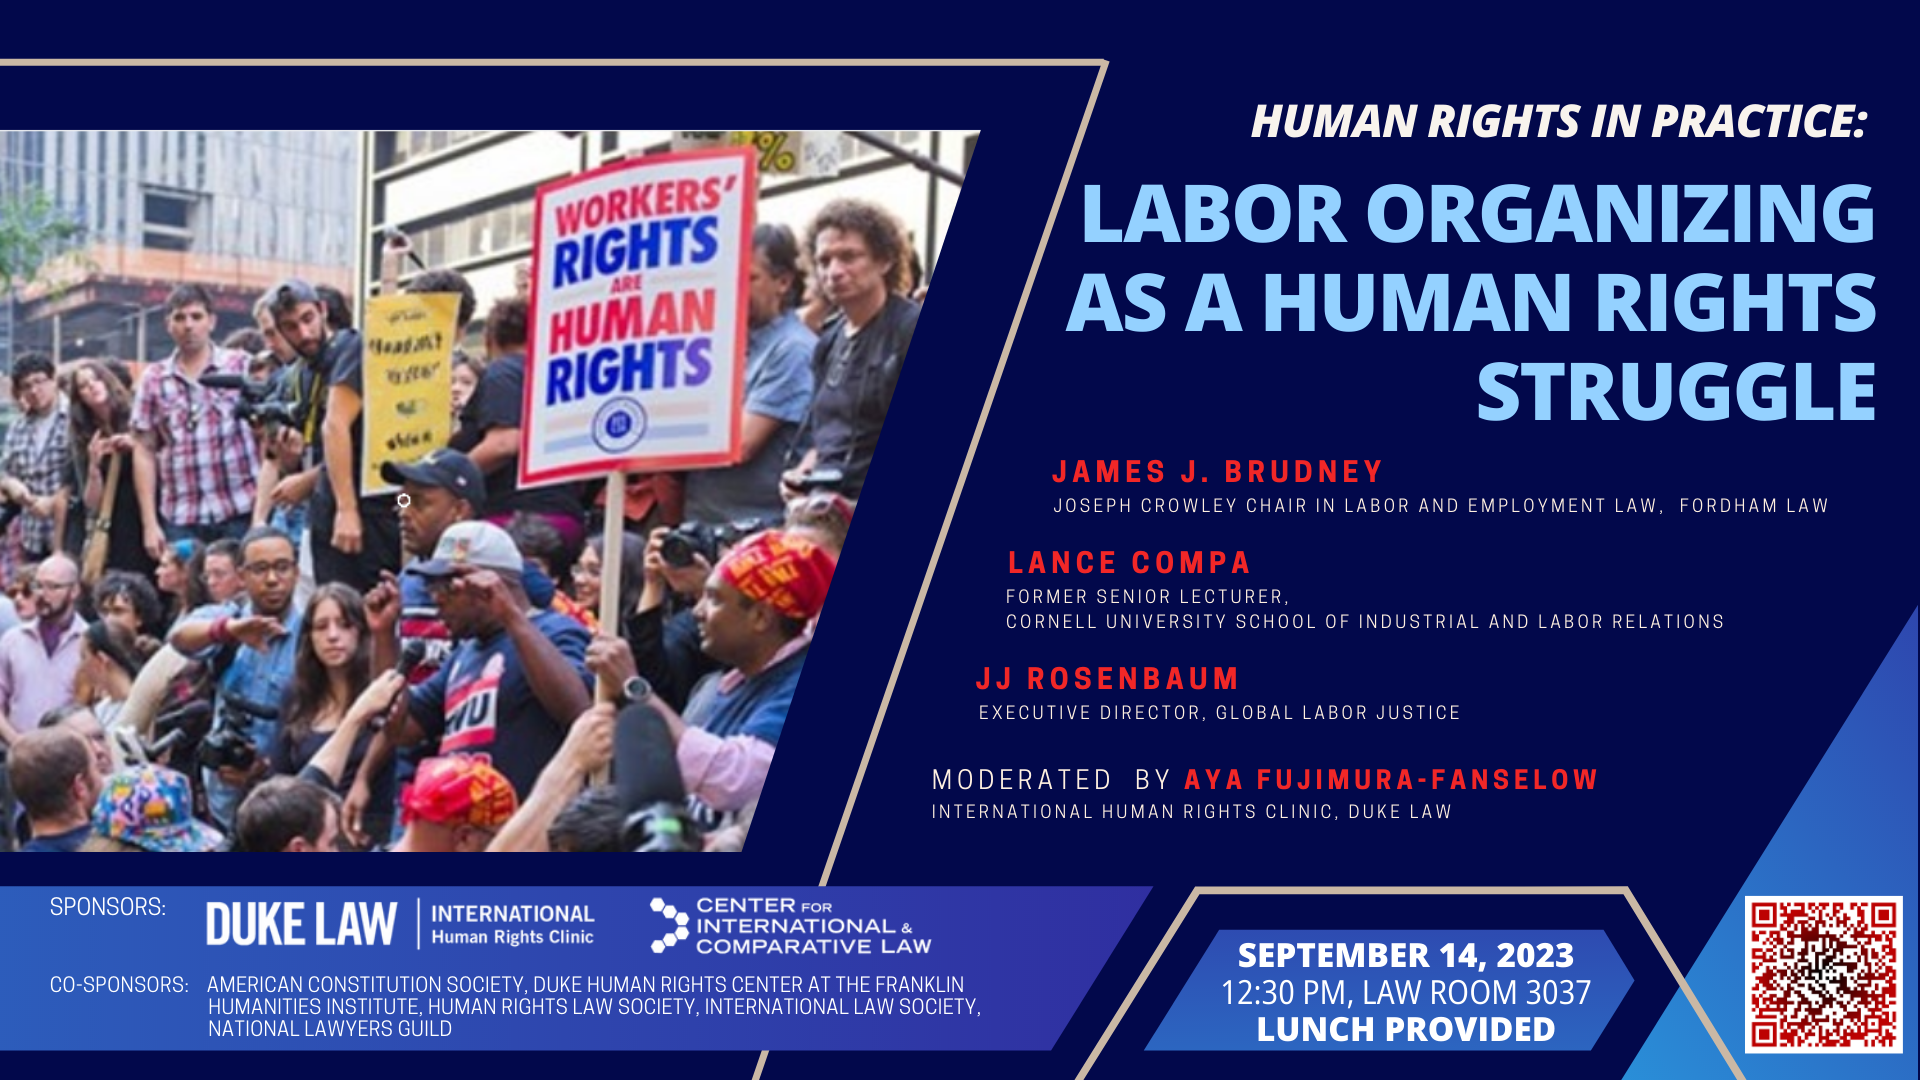 Event flyer for Labor Organizing as a Human Rights Struggle